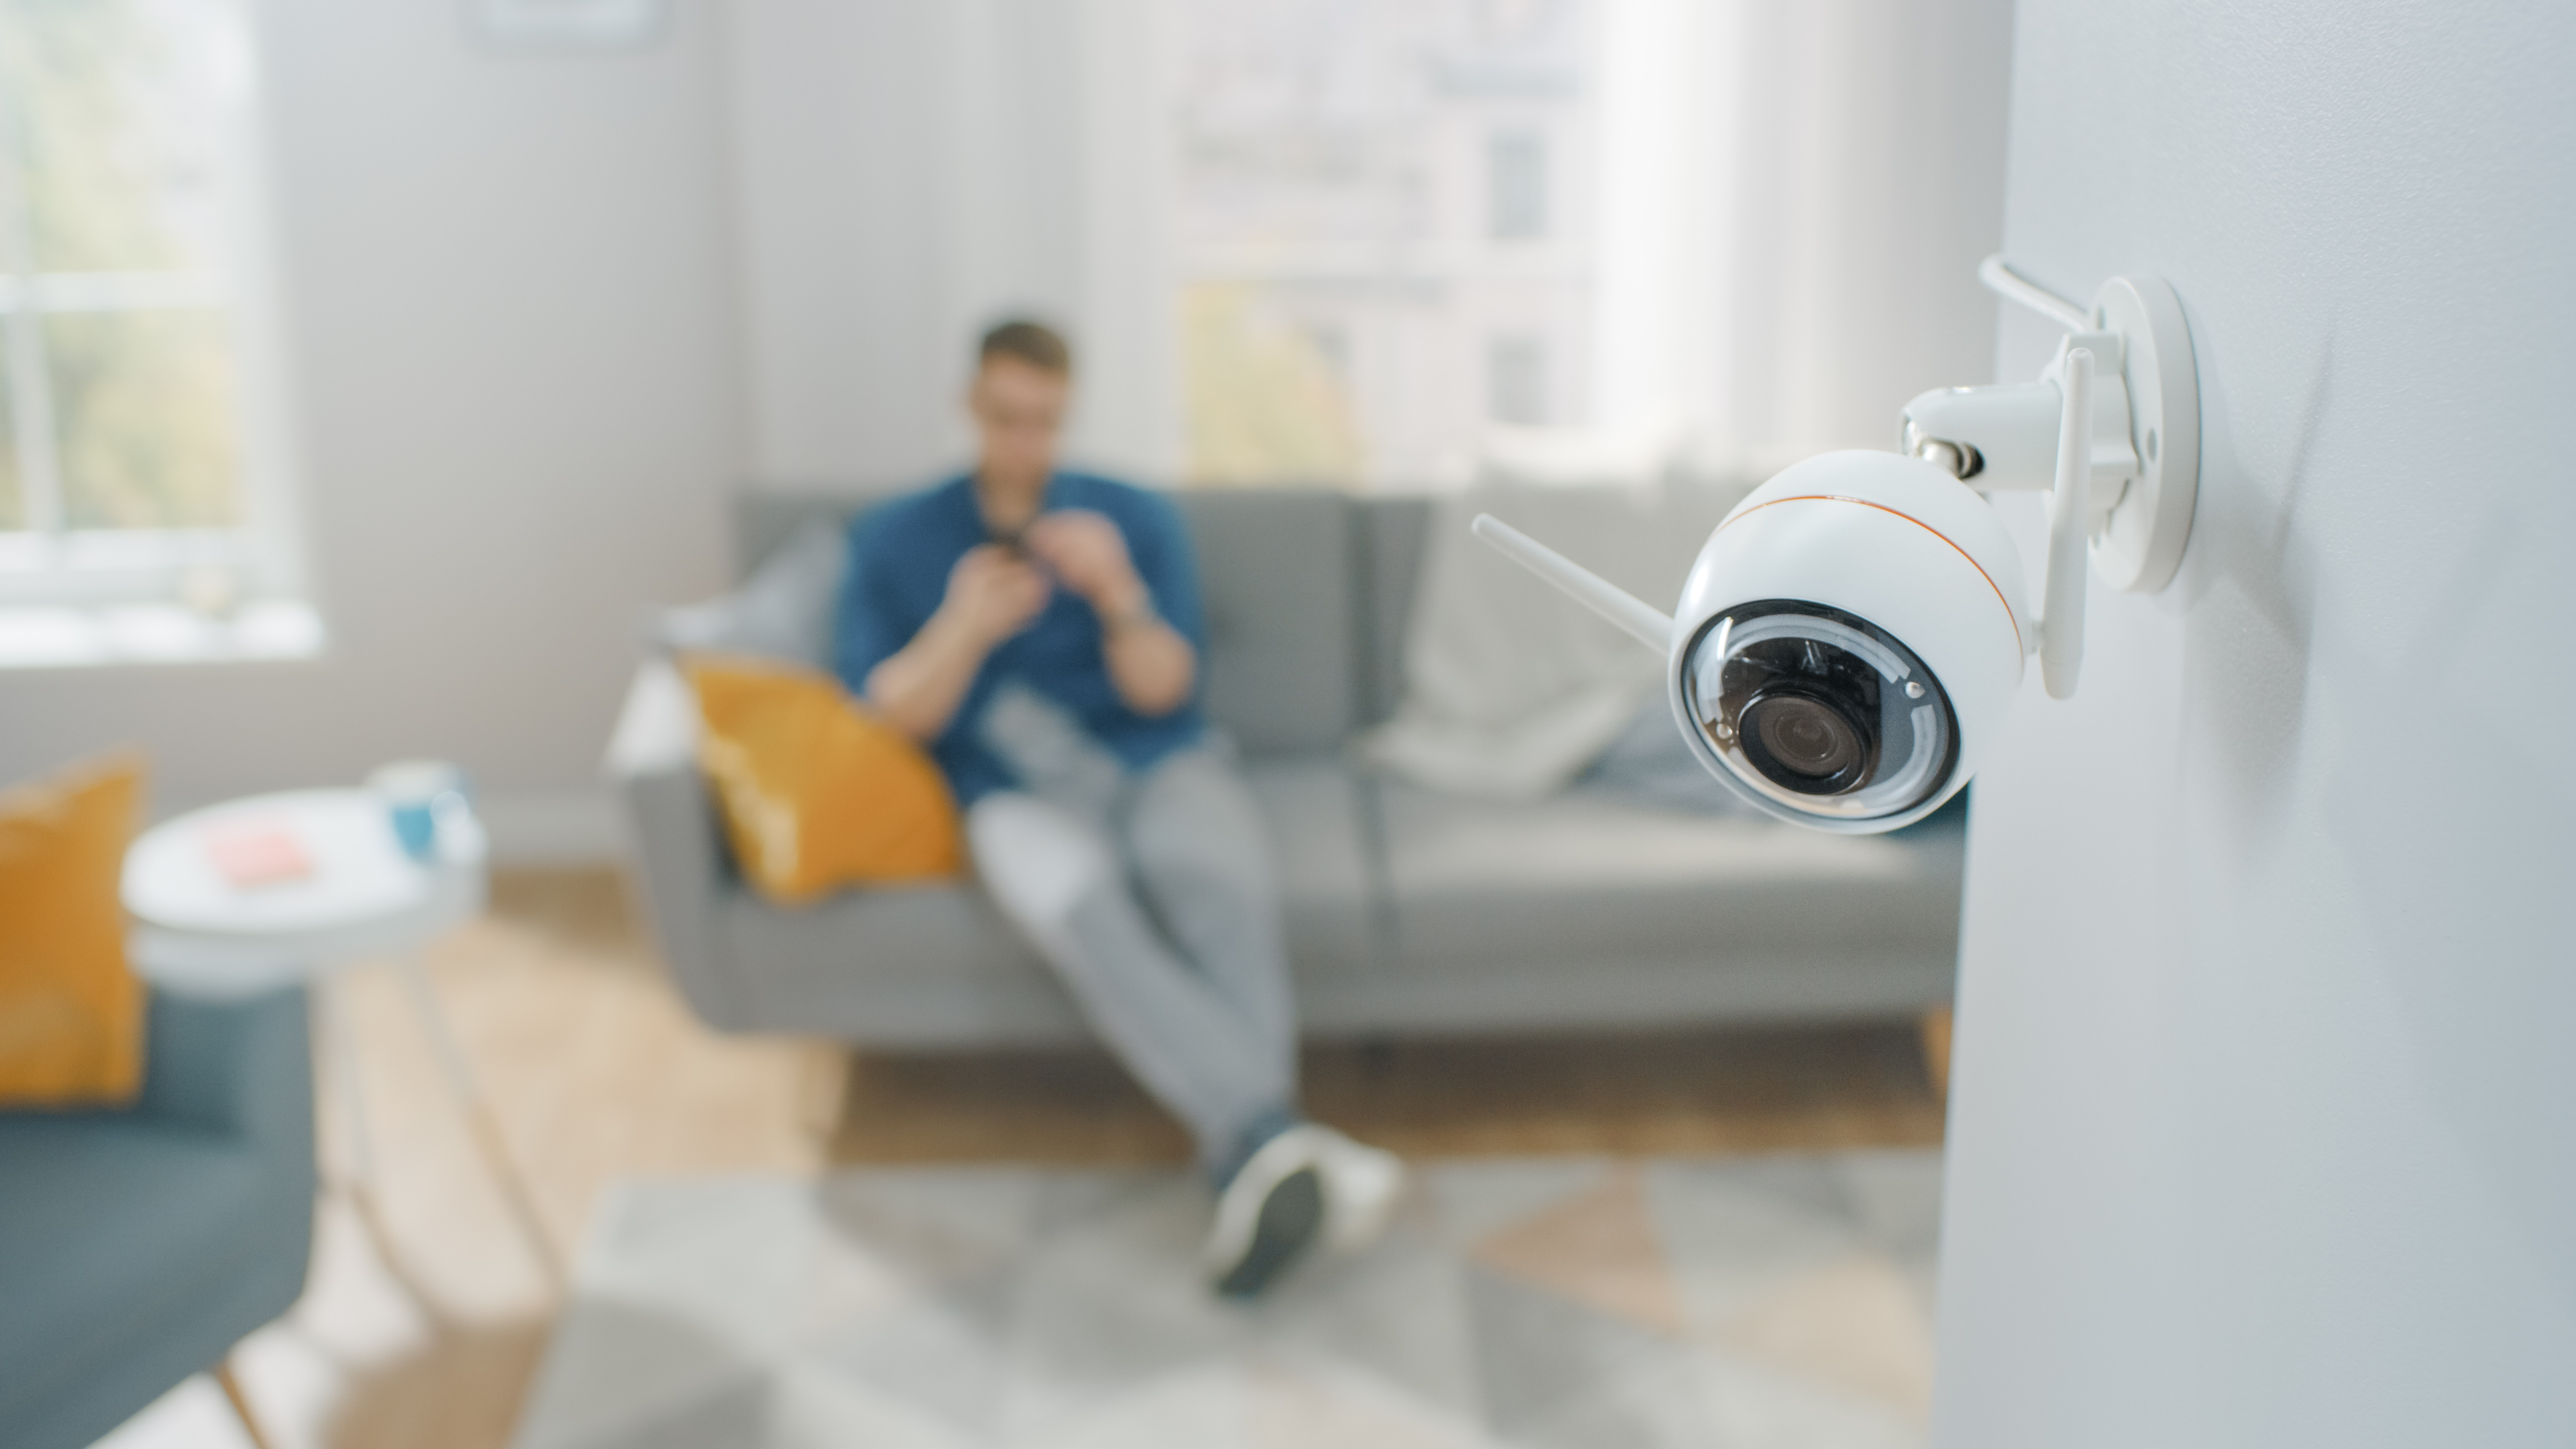 The Engineer – Researchers develop privacy-preserving cameras for sensible house units